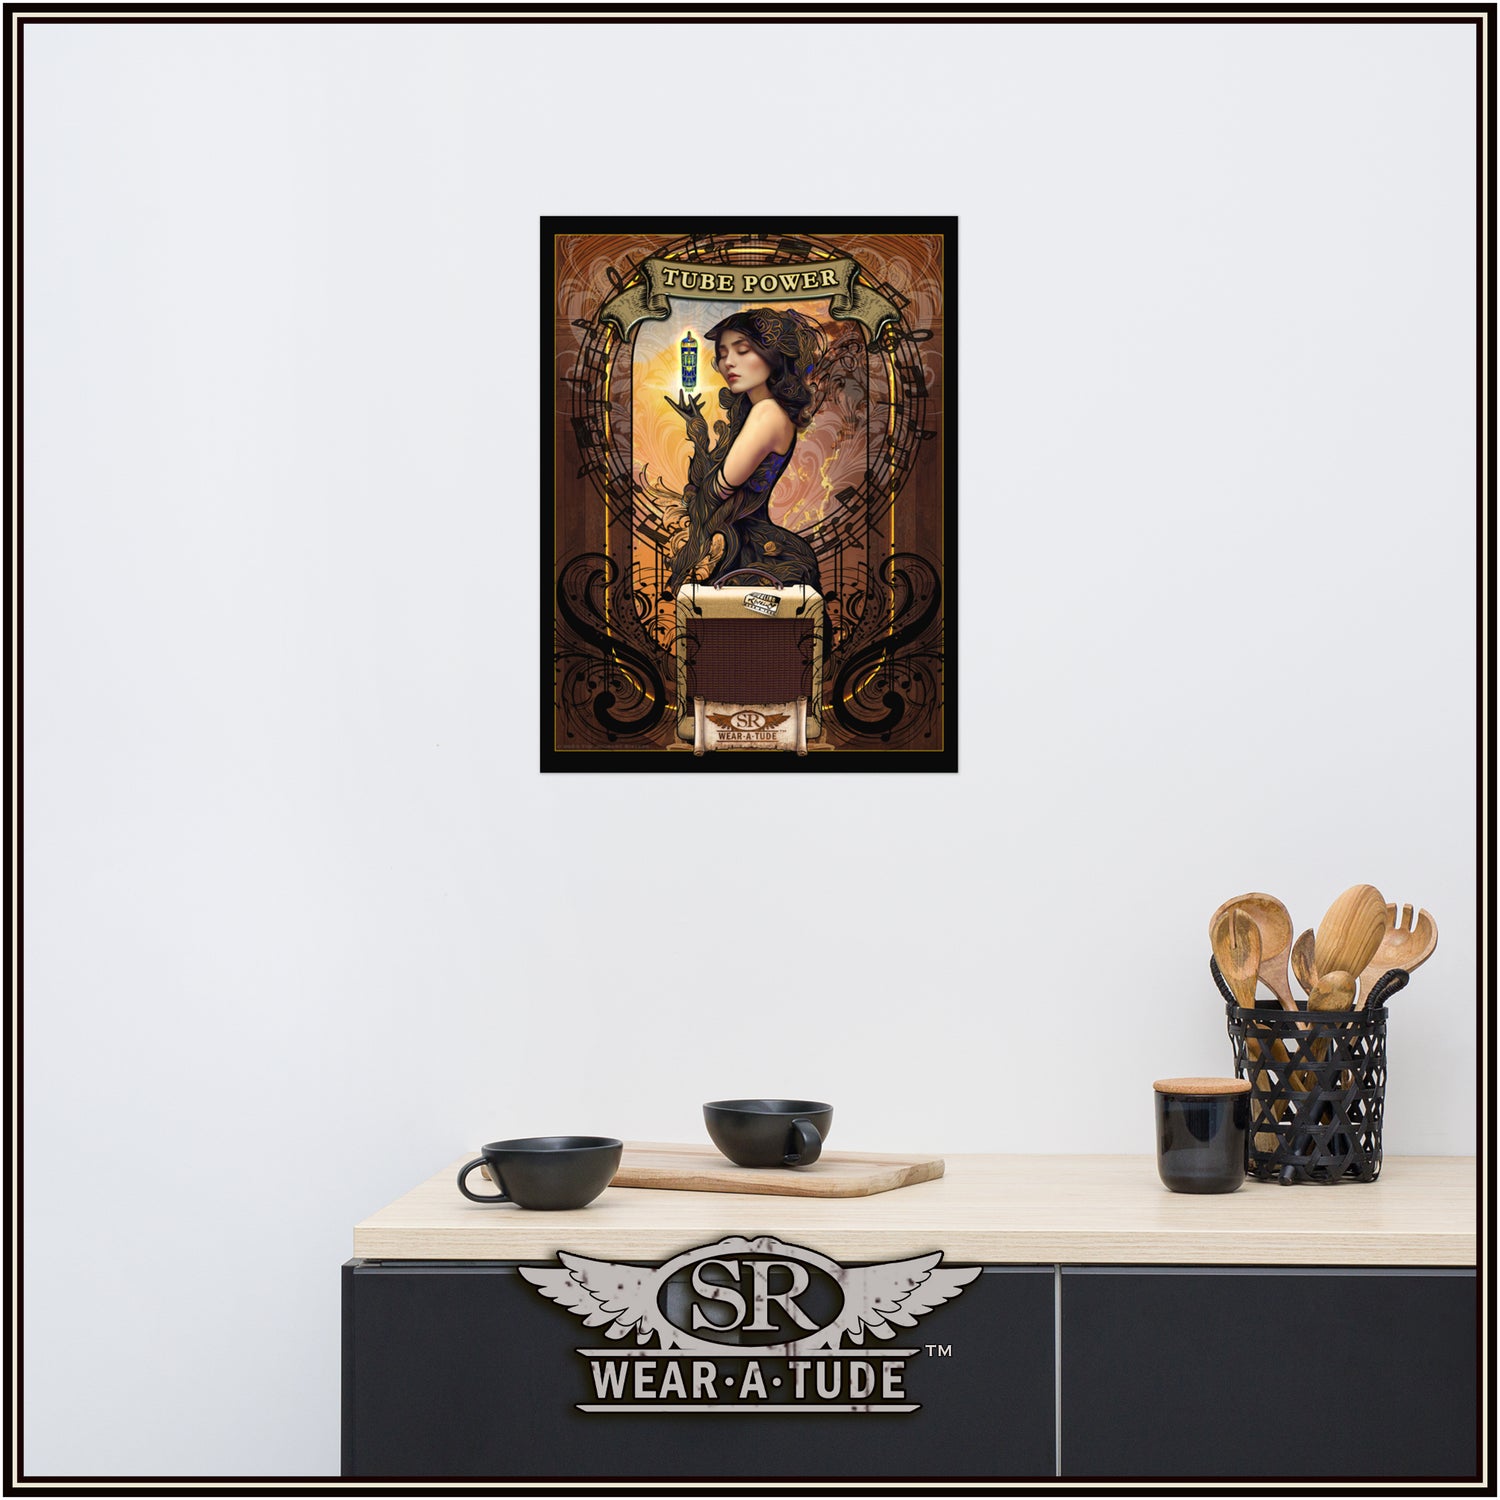 Looking for a vintage style of old-world art? Sib.Bling Rivalry Design has created that look just for you. A brushed metal look with an Art Nouveau style for your home adds class to your environment. This high-resolution image featuring a skull with tentacles trimmed with intricate marble pillars will look epic on any wall.<br>Our museum-quality posters are made on thick matte paper. Add a wonderful accent to your room and office with these quality posters from SR Wear Atude.